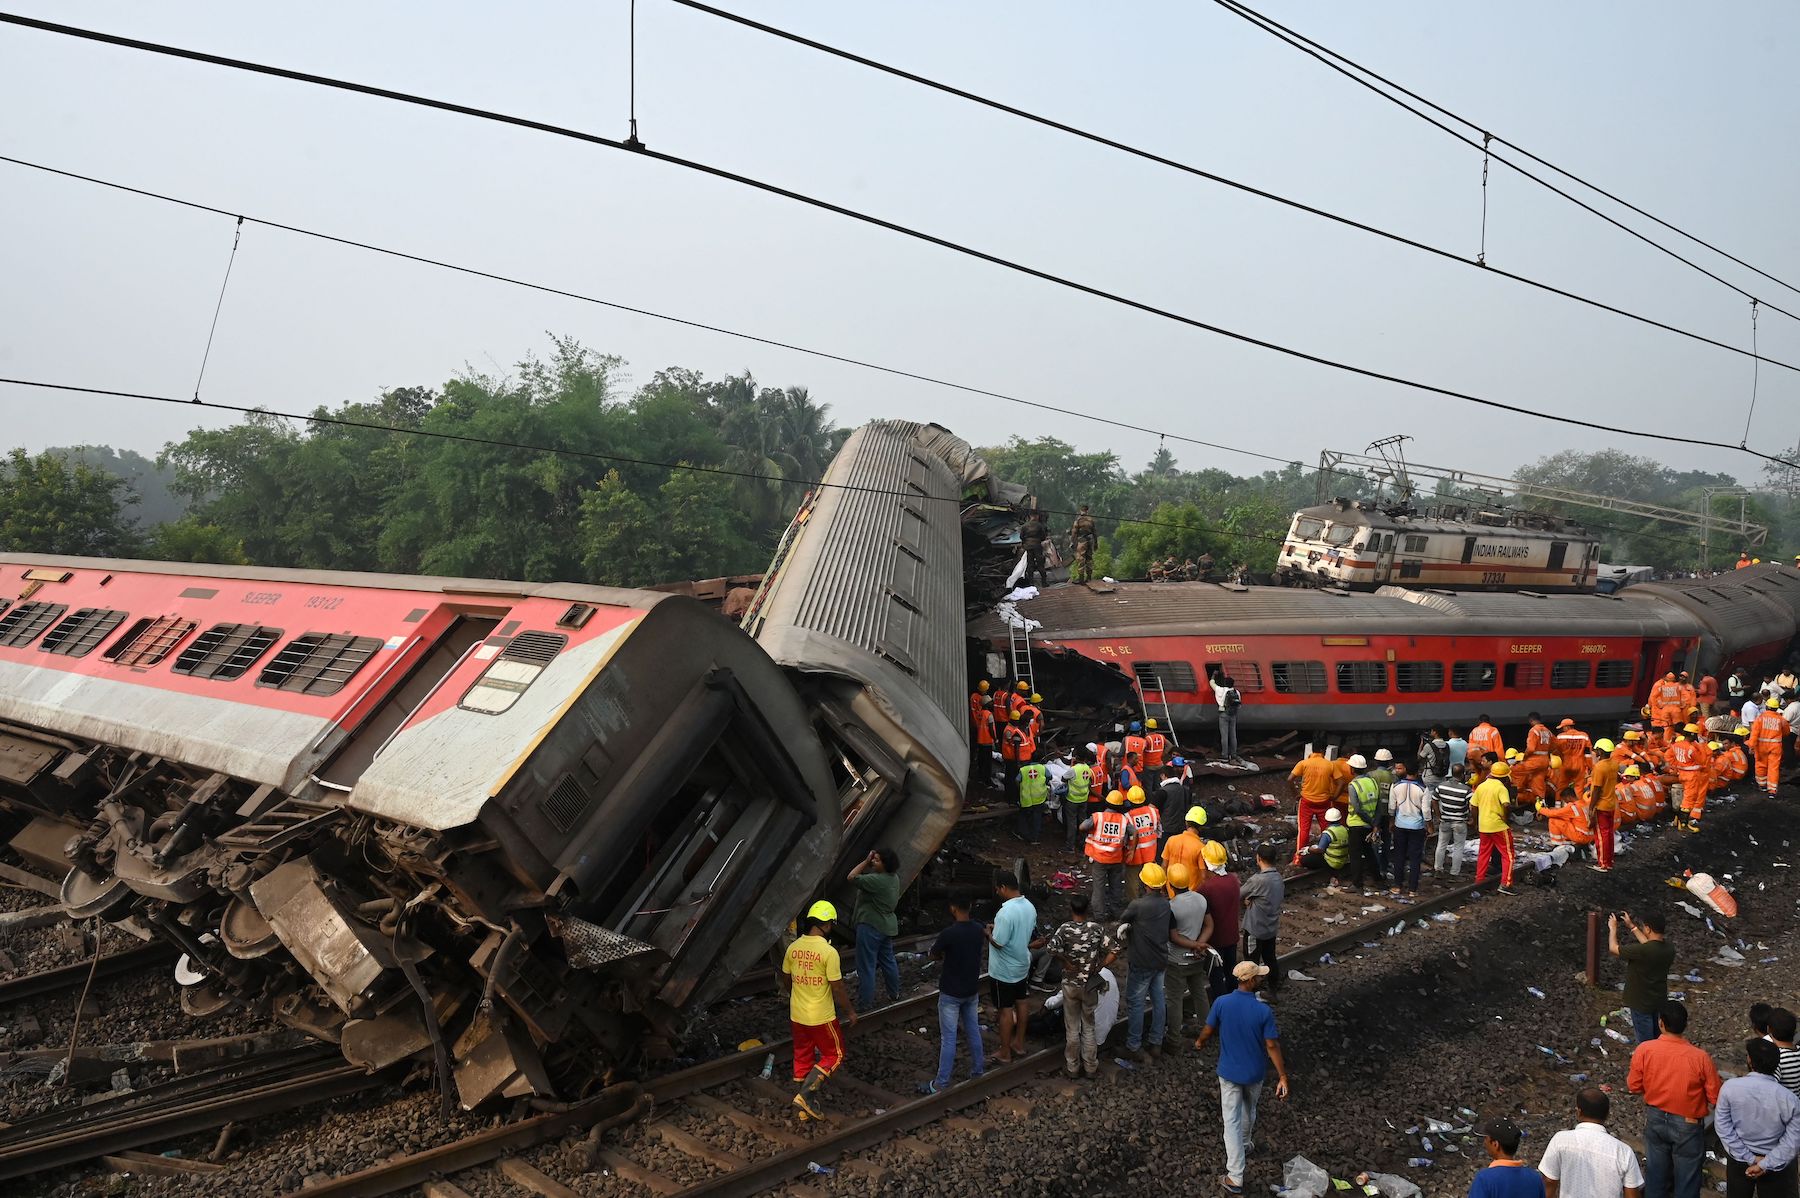 Three Trains Collided In India And At Least 295 People Are Dead And 1,175 Injured